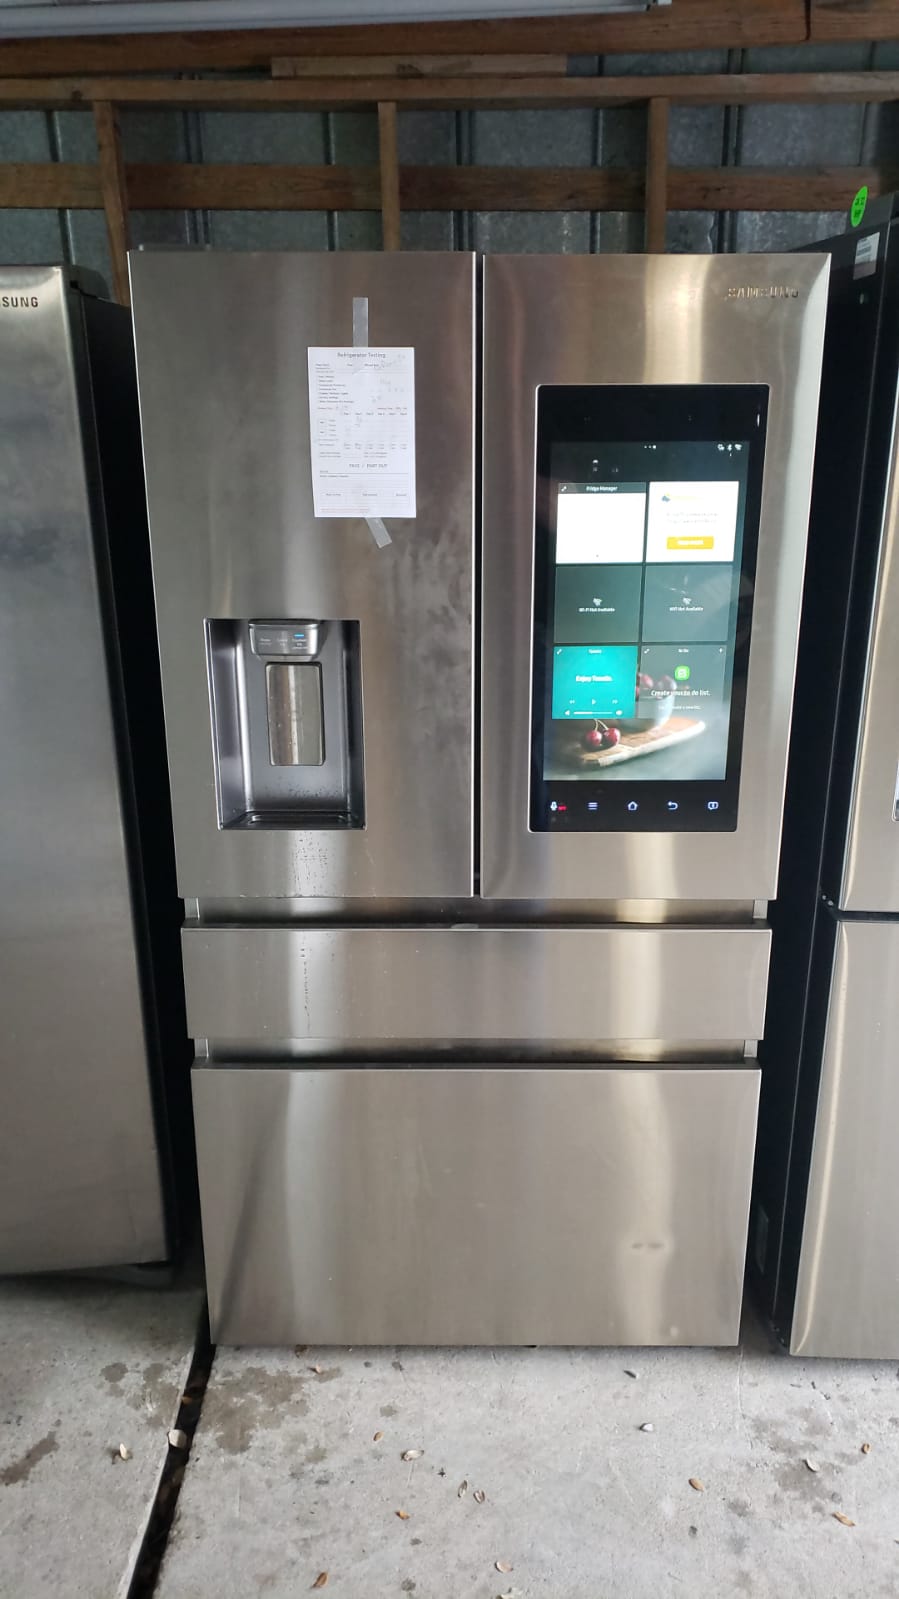 example pictures of An example of a Samsung “Scratch and Dent” refrigerator from our program.